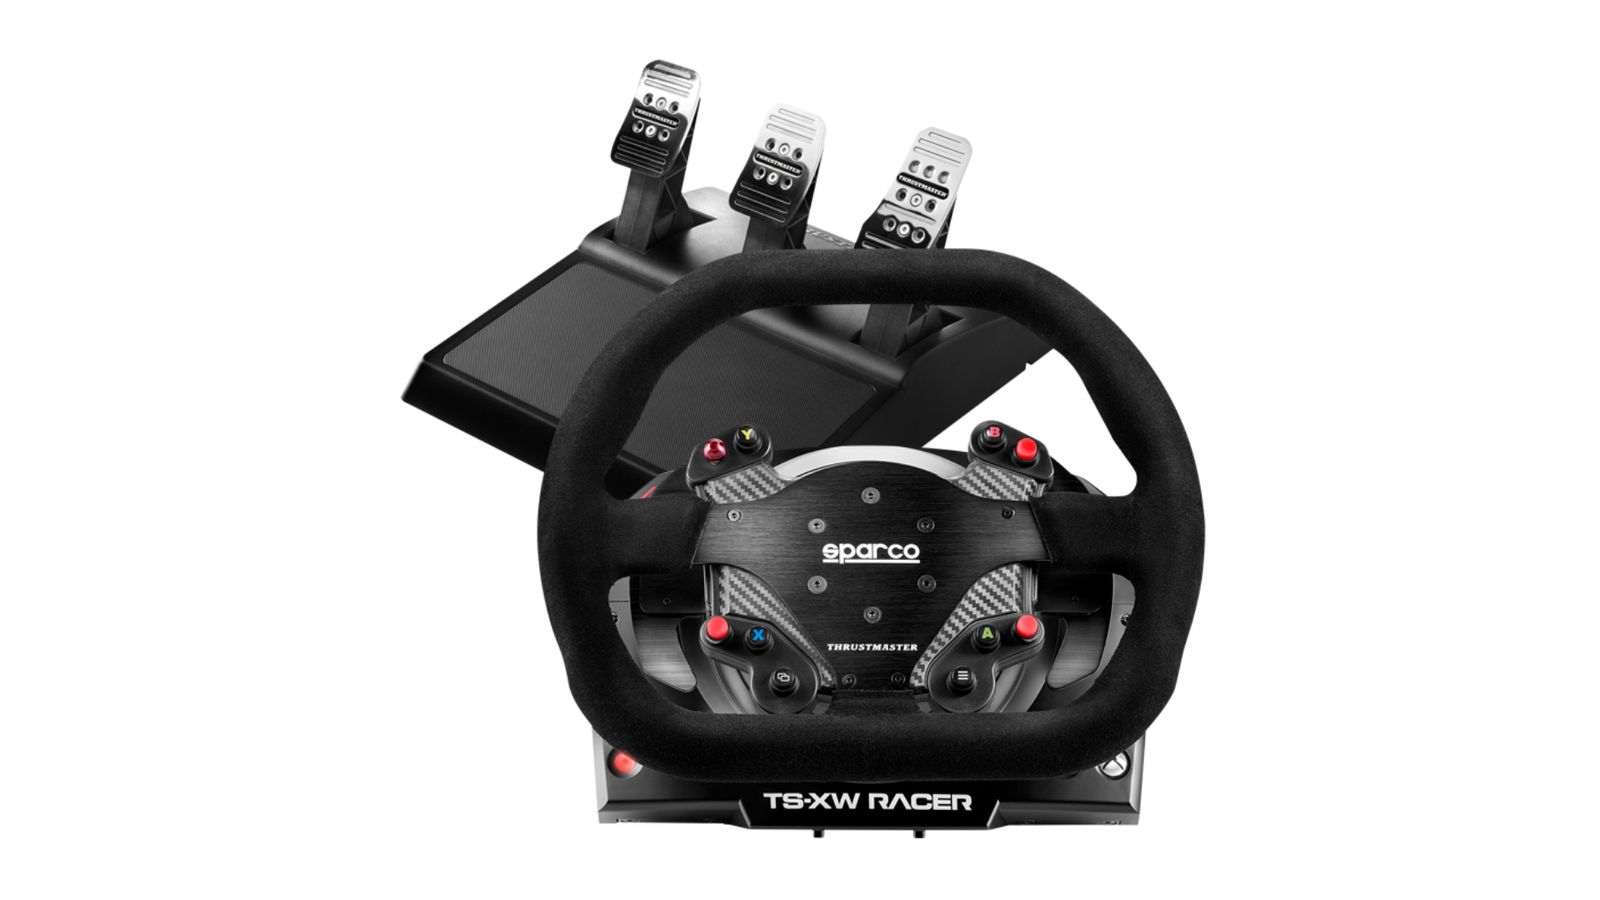 Thrustmaster TS-XW Racer product image of a red and black wheel and pedals.